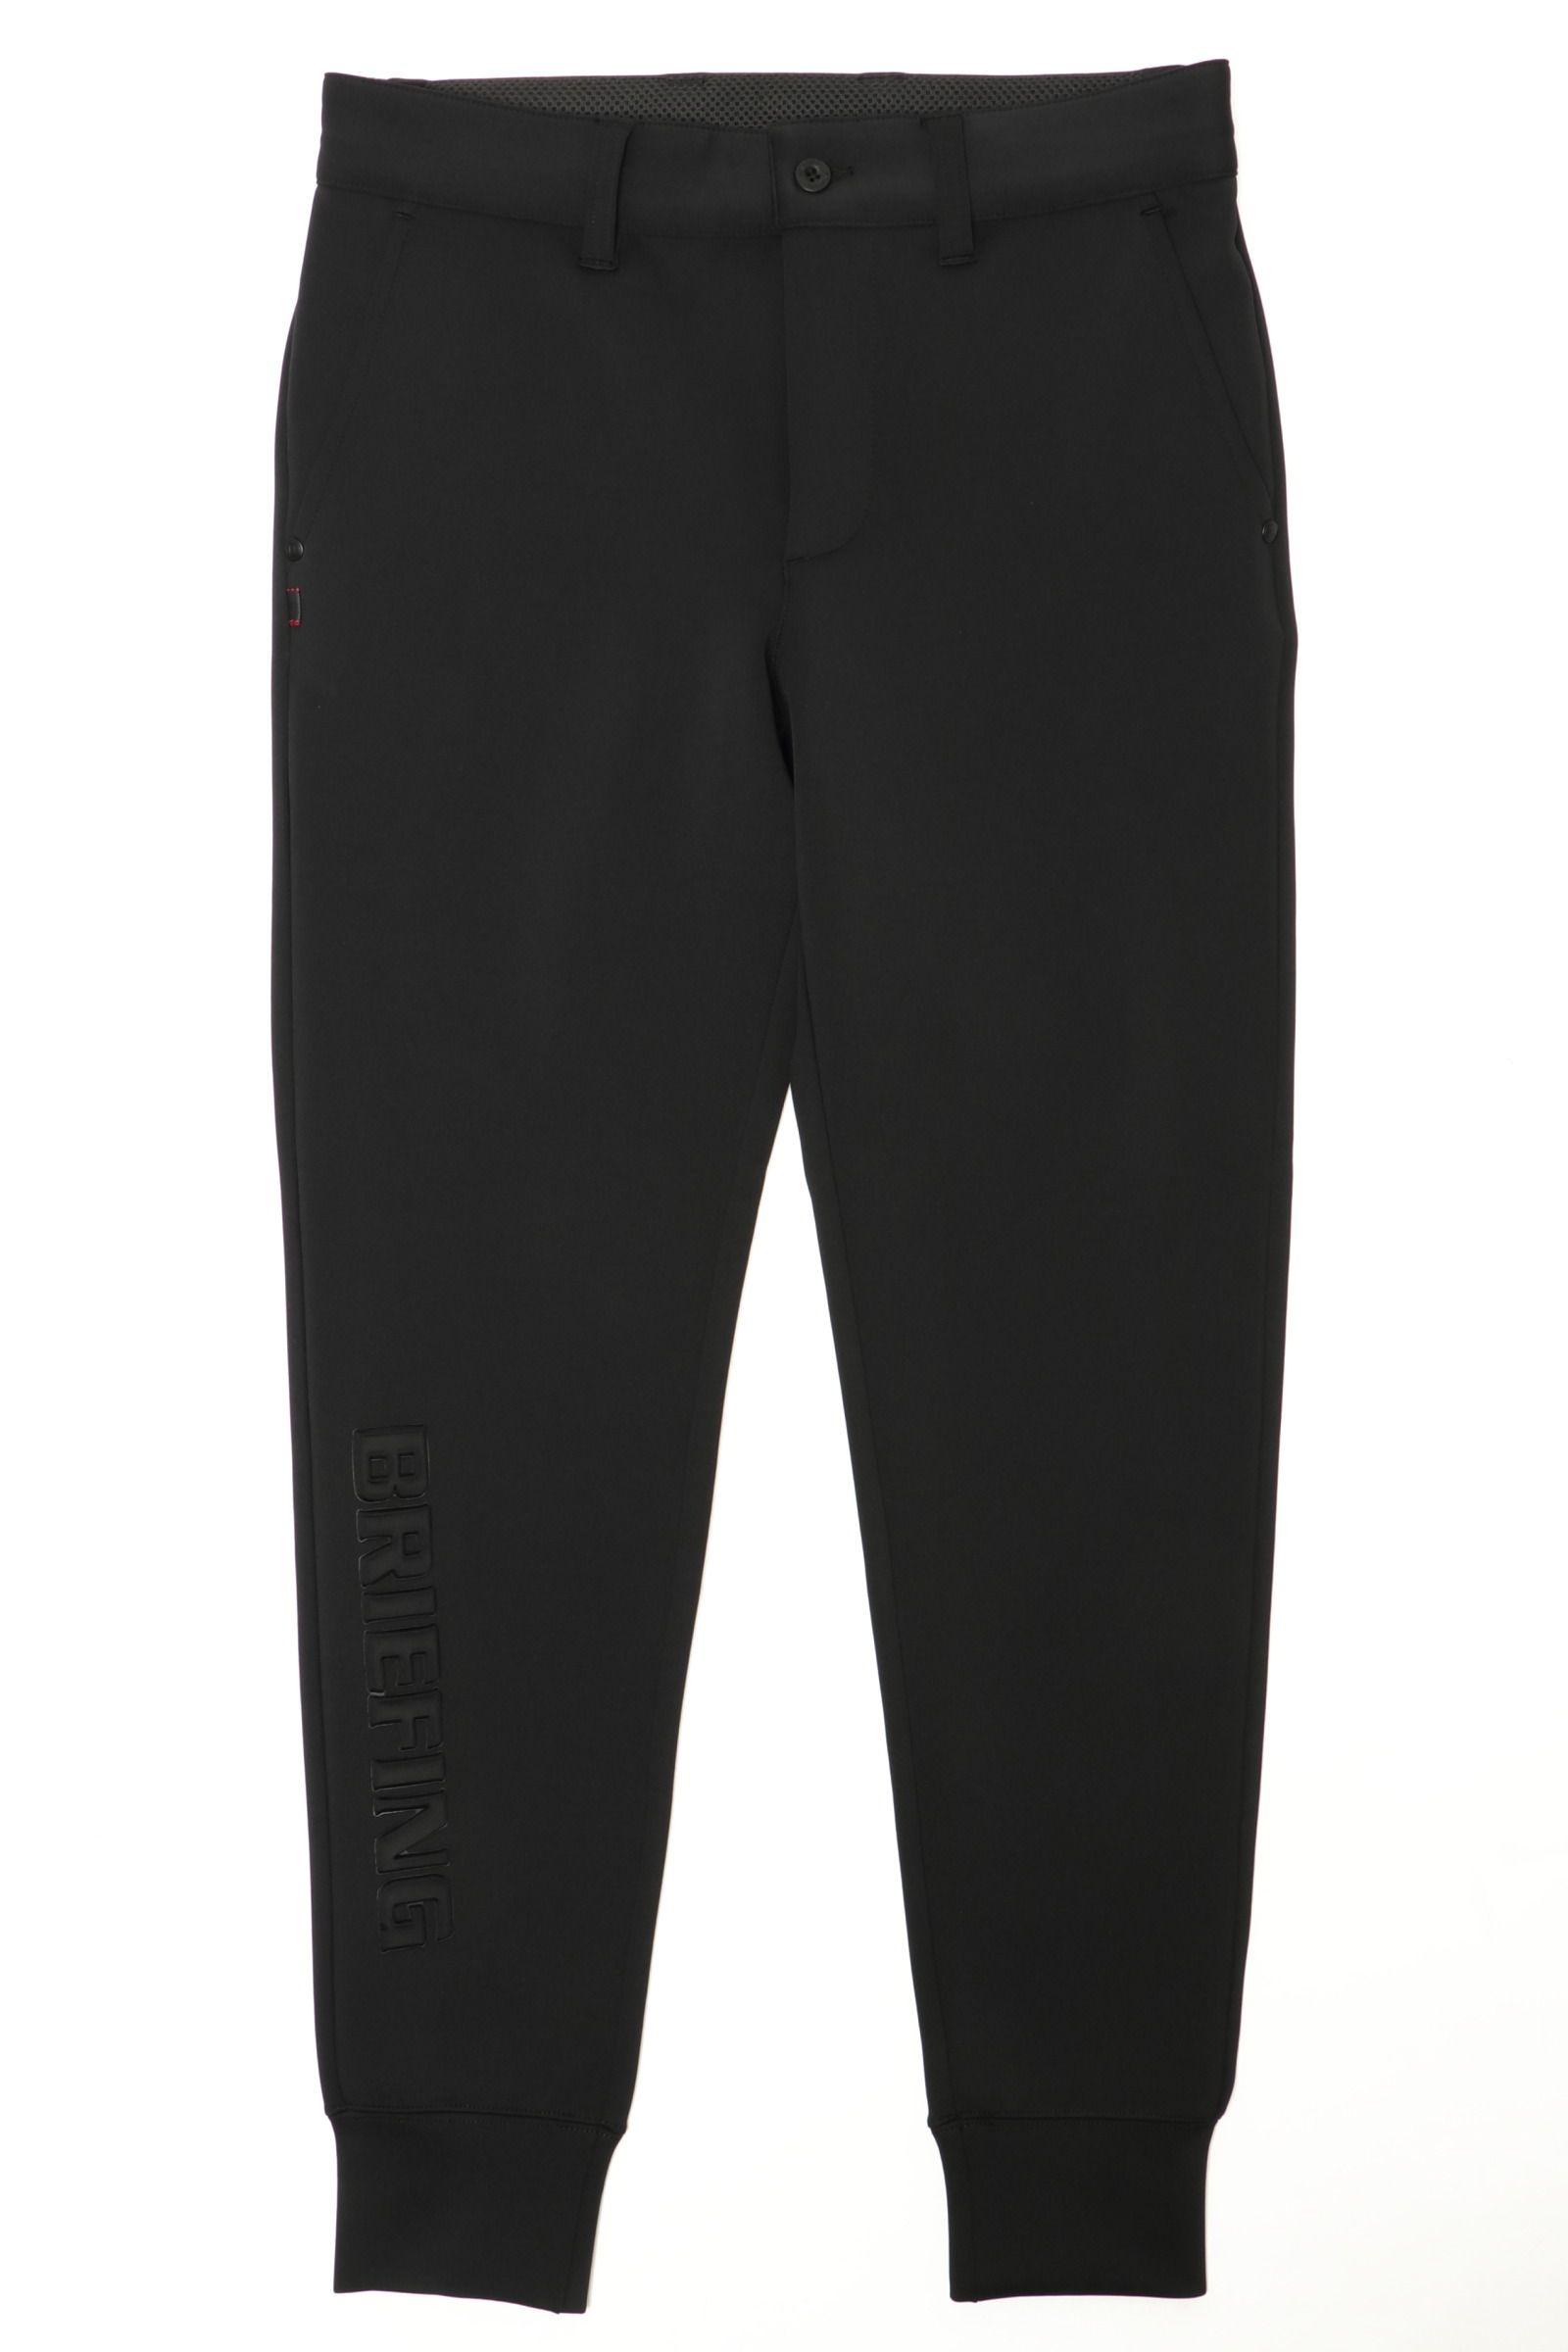 BRIEFING GOLF - 【セットアップあり】 MENS 3D LOGO JOGGER PANTS 